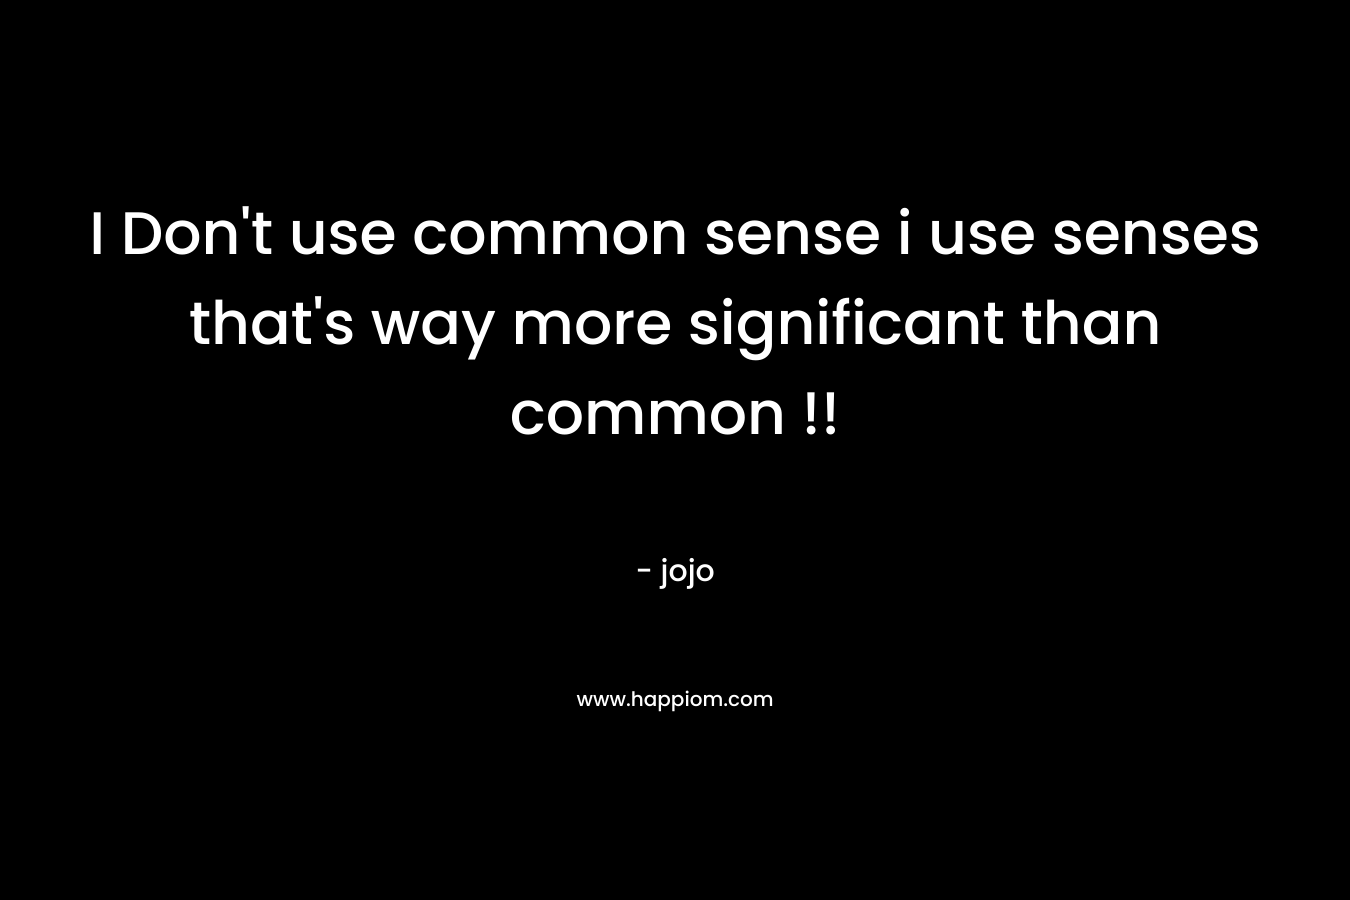 I Don't use common sense i use senses that's way more significant than common !!